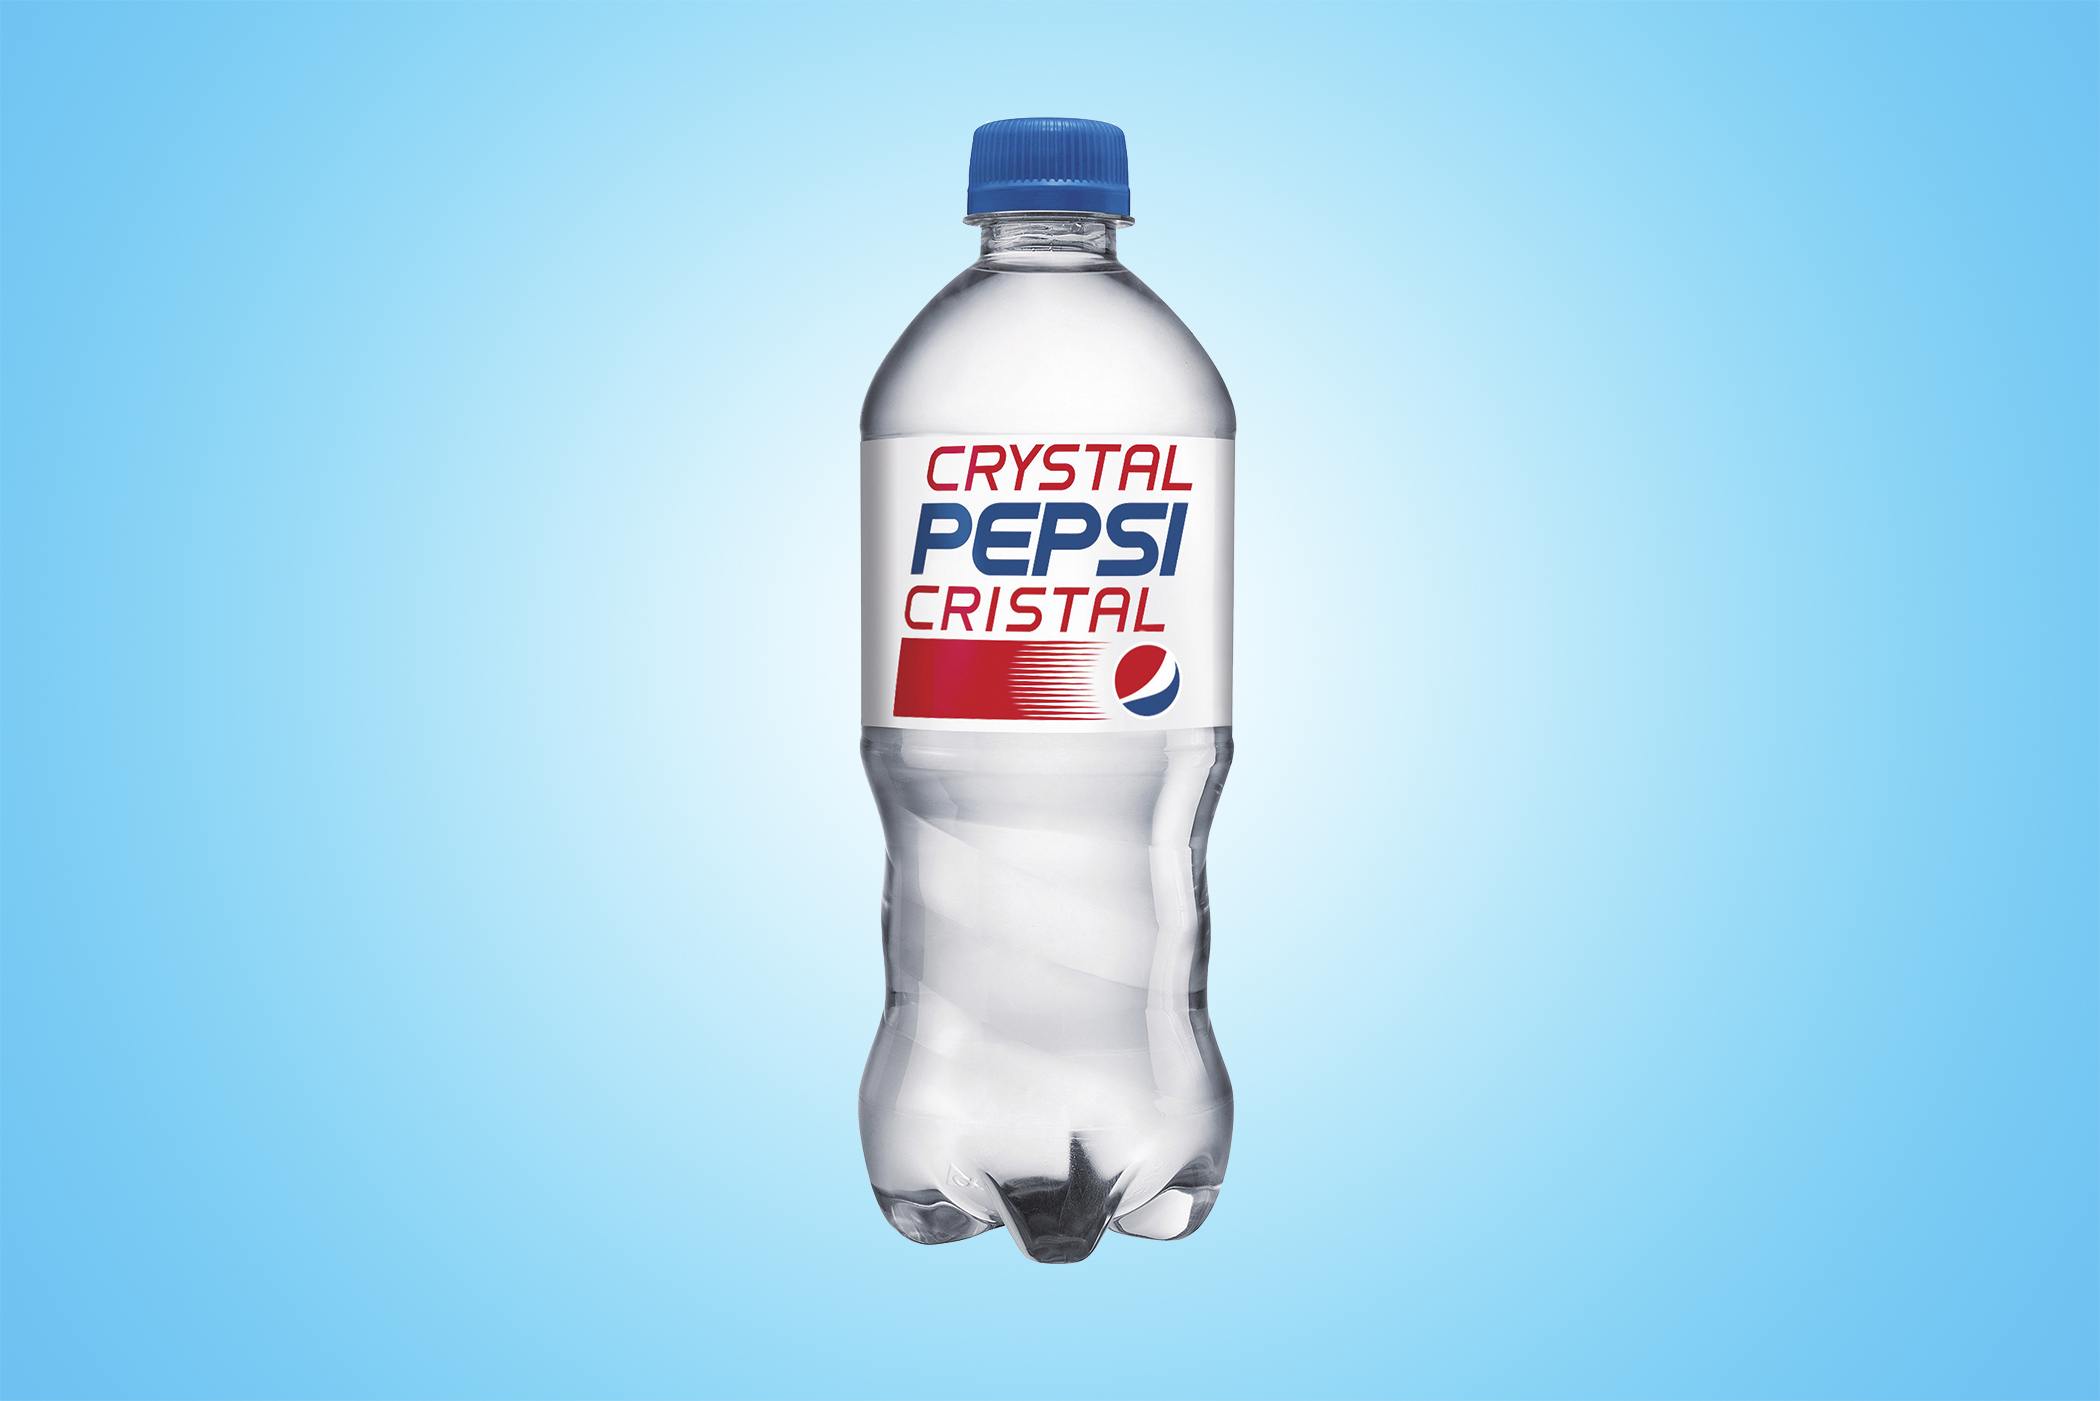 Crystal Pepsi(R) - the iconic &apos;90s clear cola - will be available for a limited time across Canada beginning July 11.